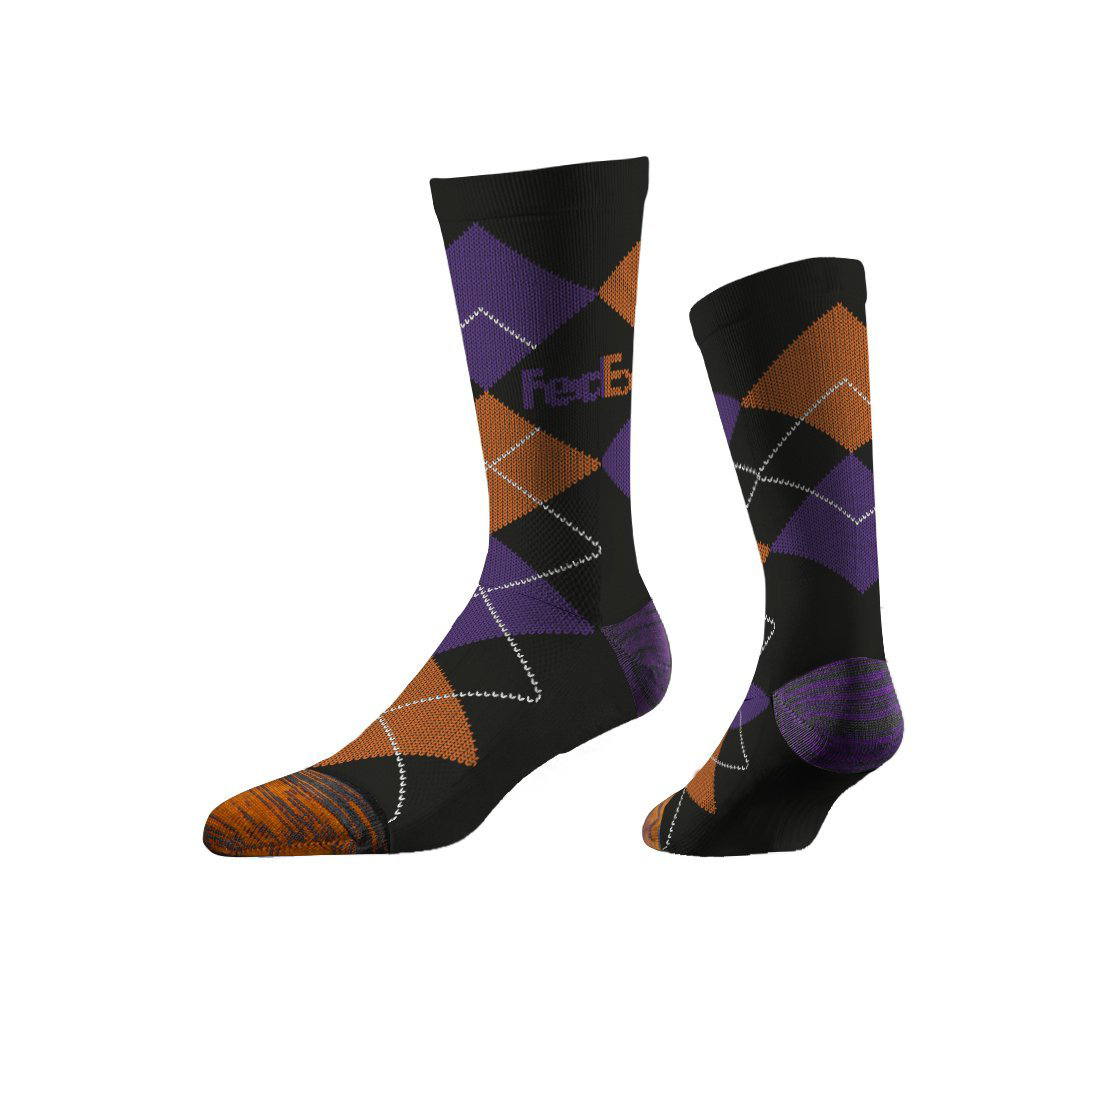 Business Knit Crew Socks in black with 3 colour logo and colour match stripes